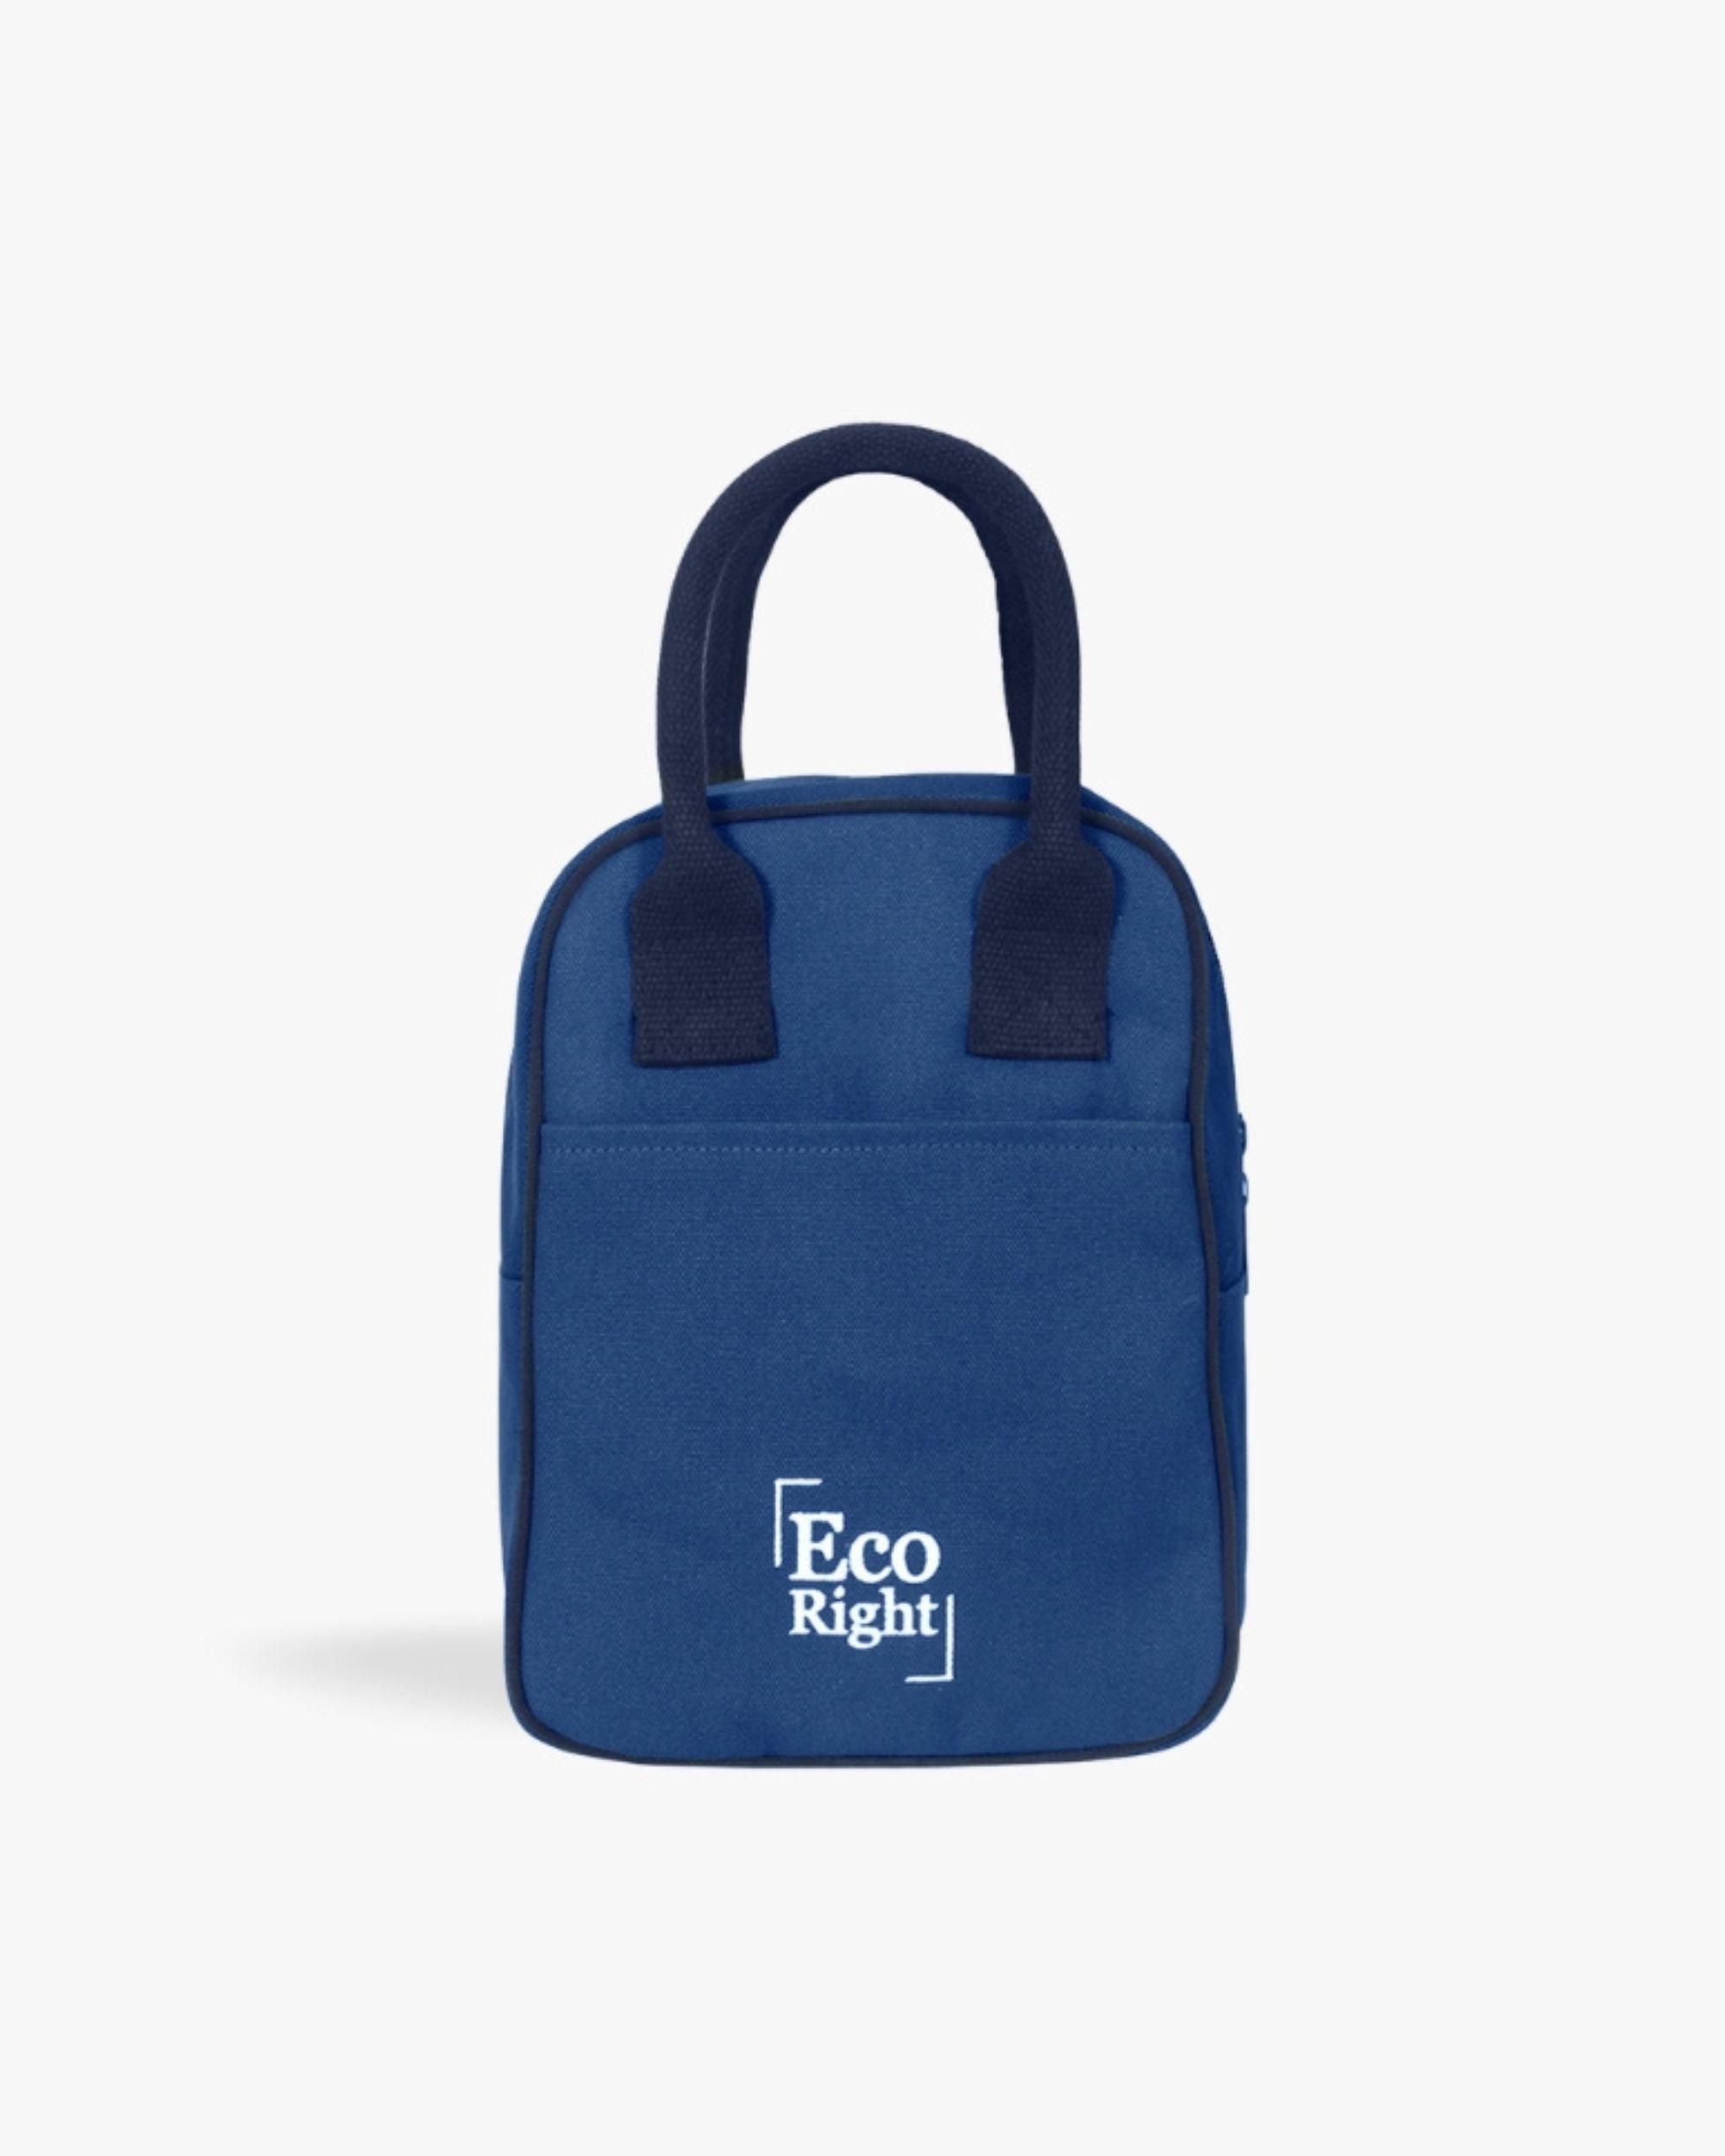 Lunch Bag - Navy Blue